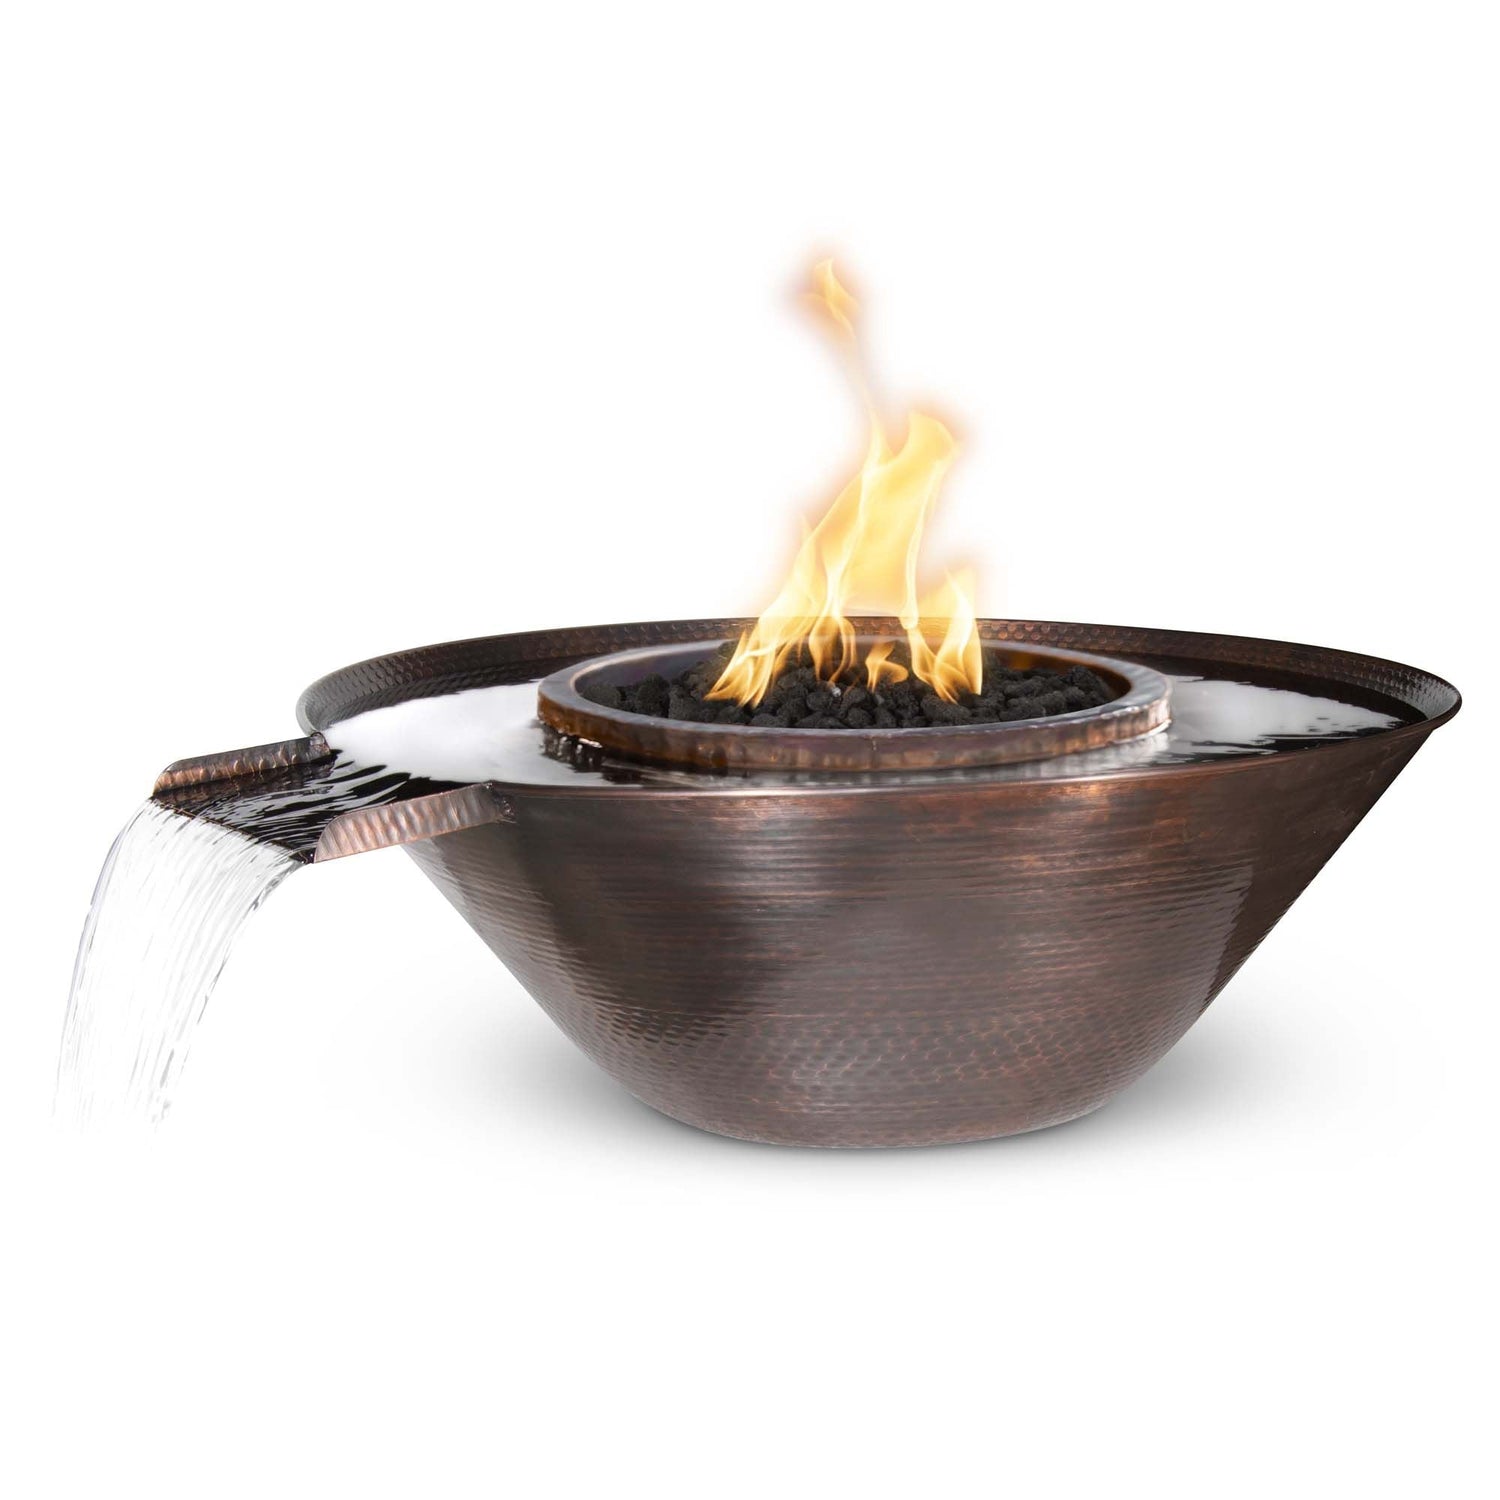 Fire and Fire w/ Water Bowls